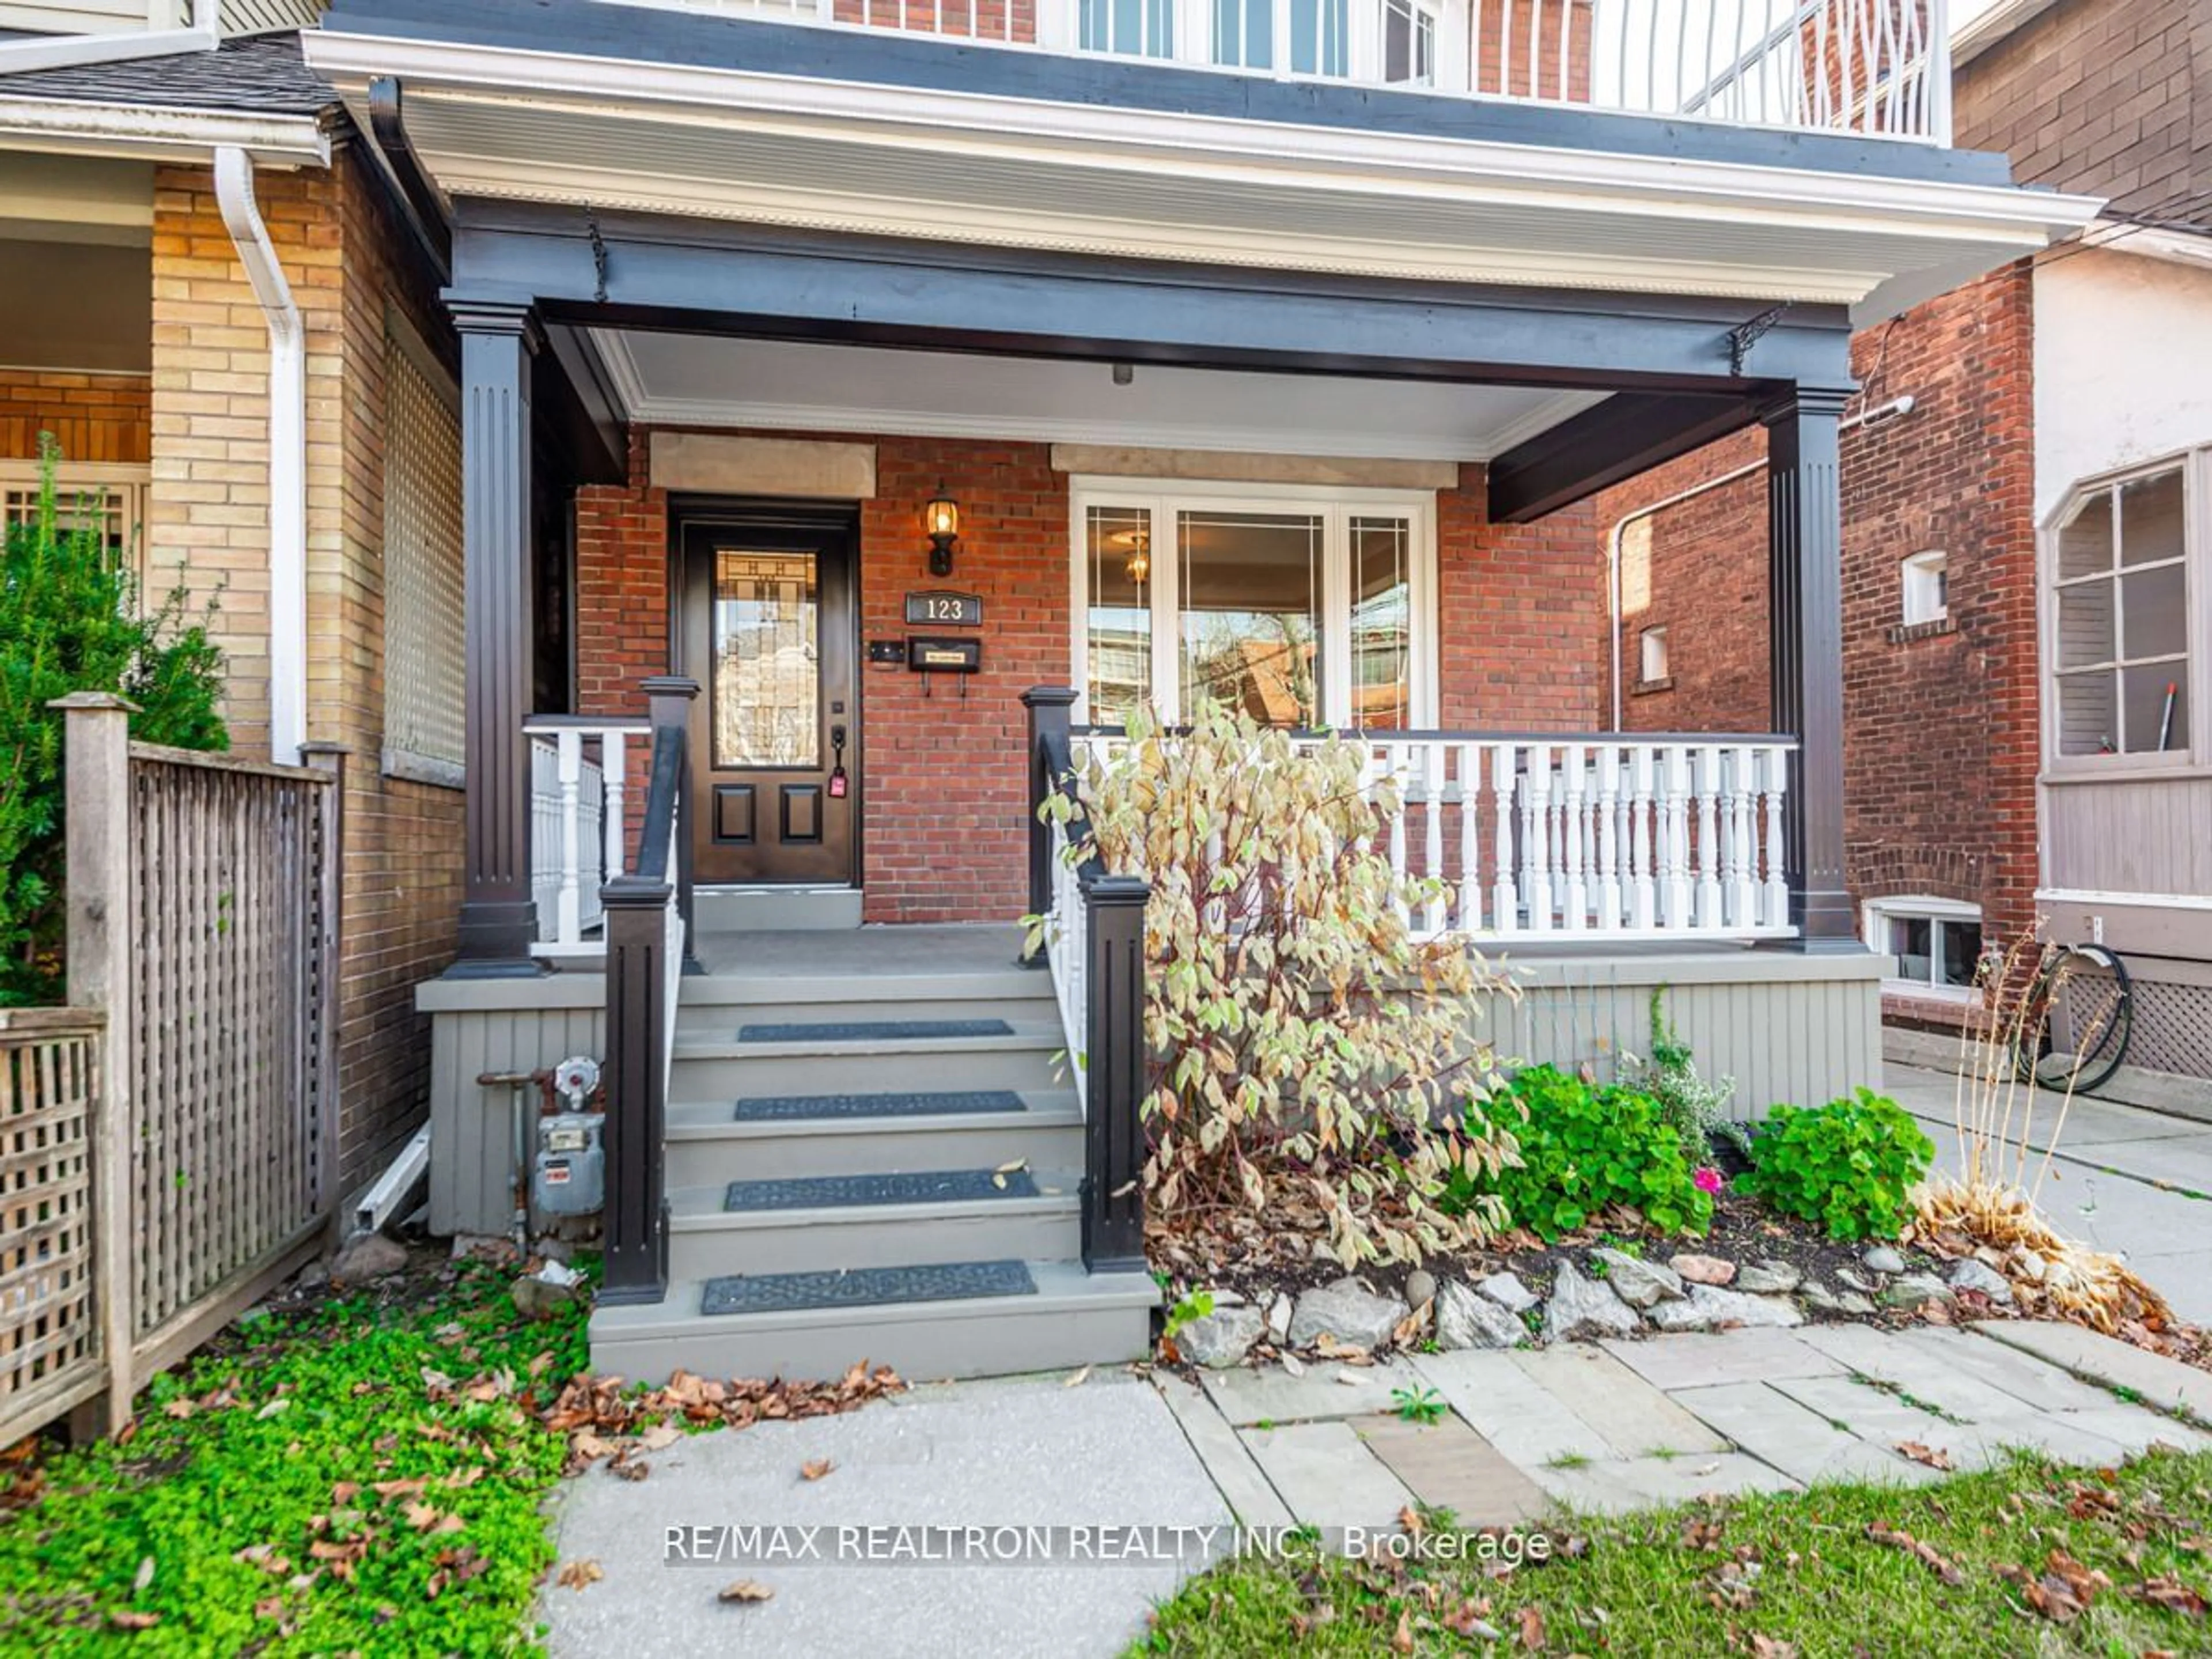 Home with brick exterior material for 123 Browning Ave, Toronto Ontario M4K 1W4